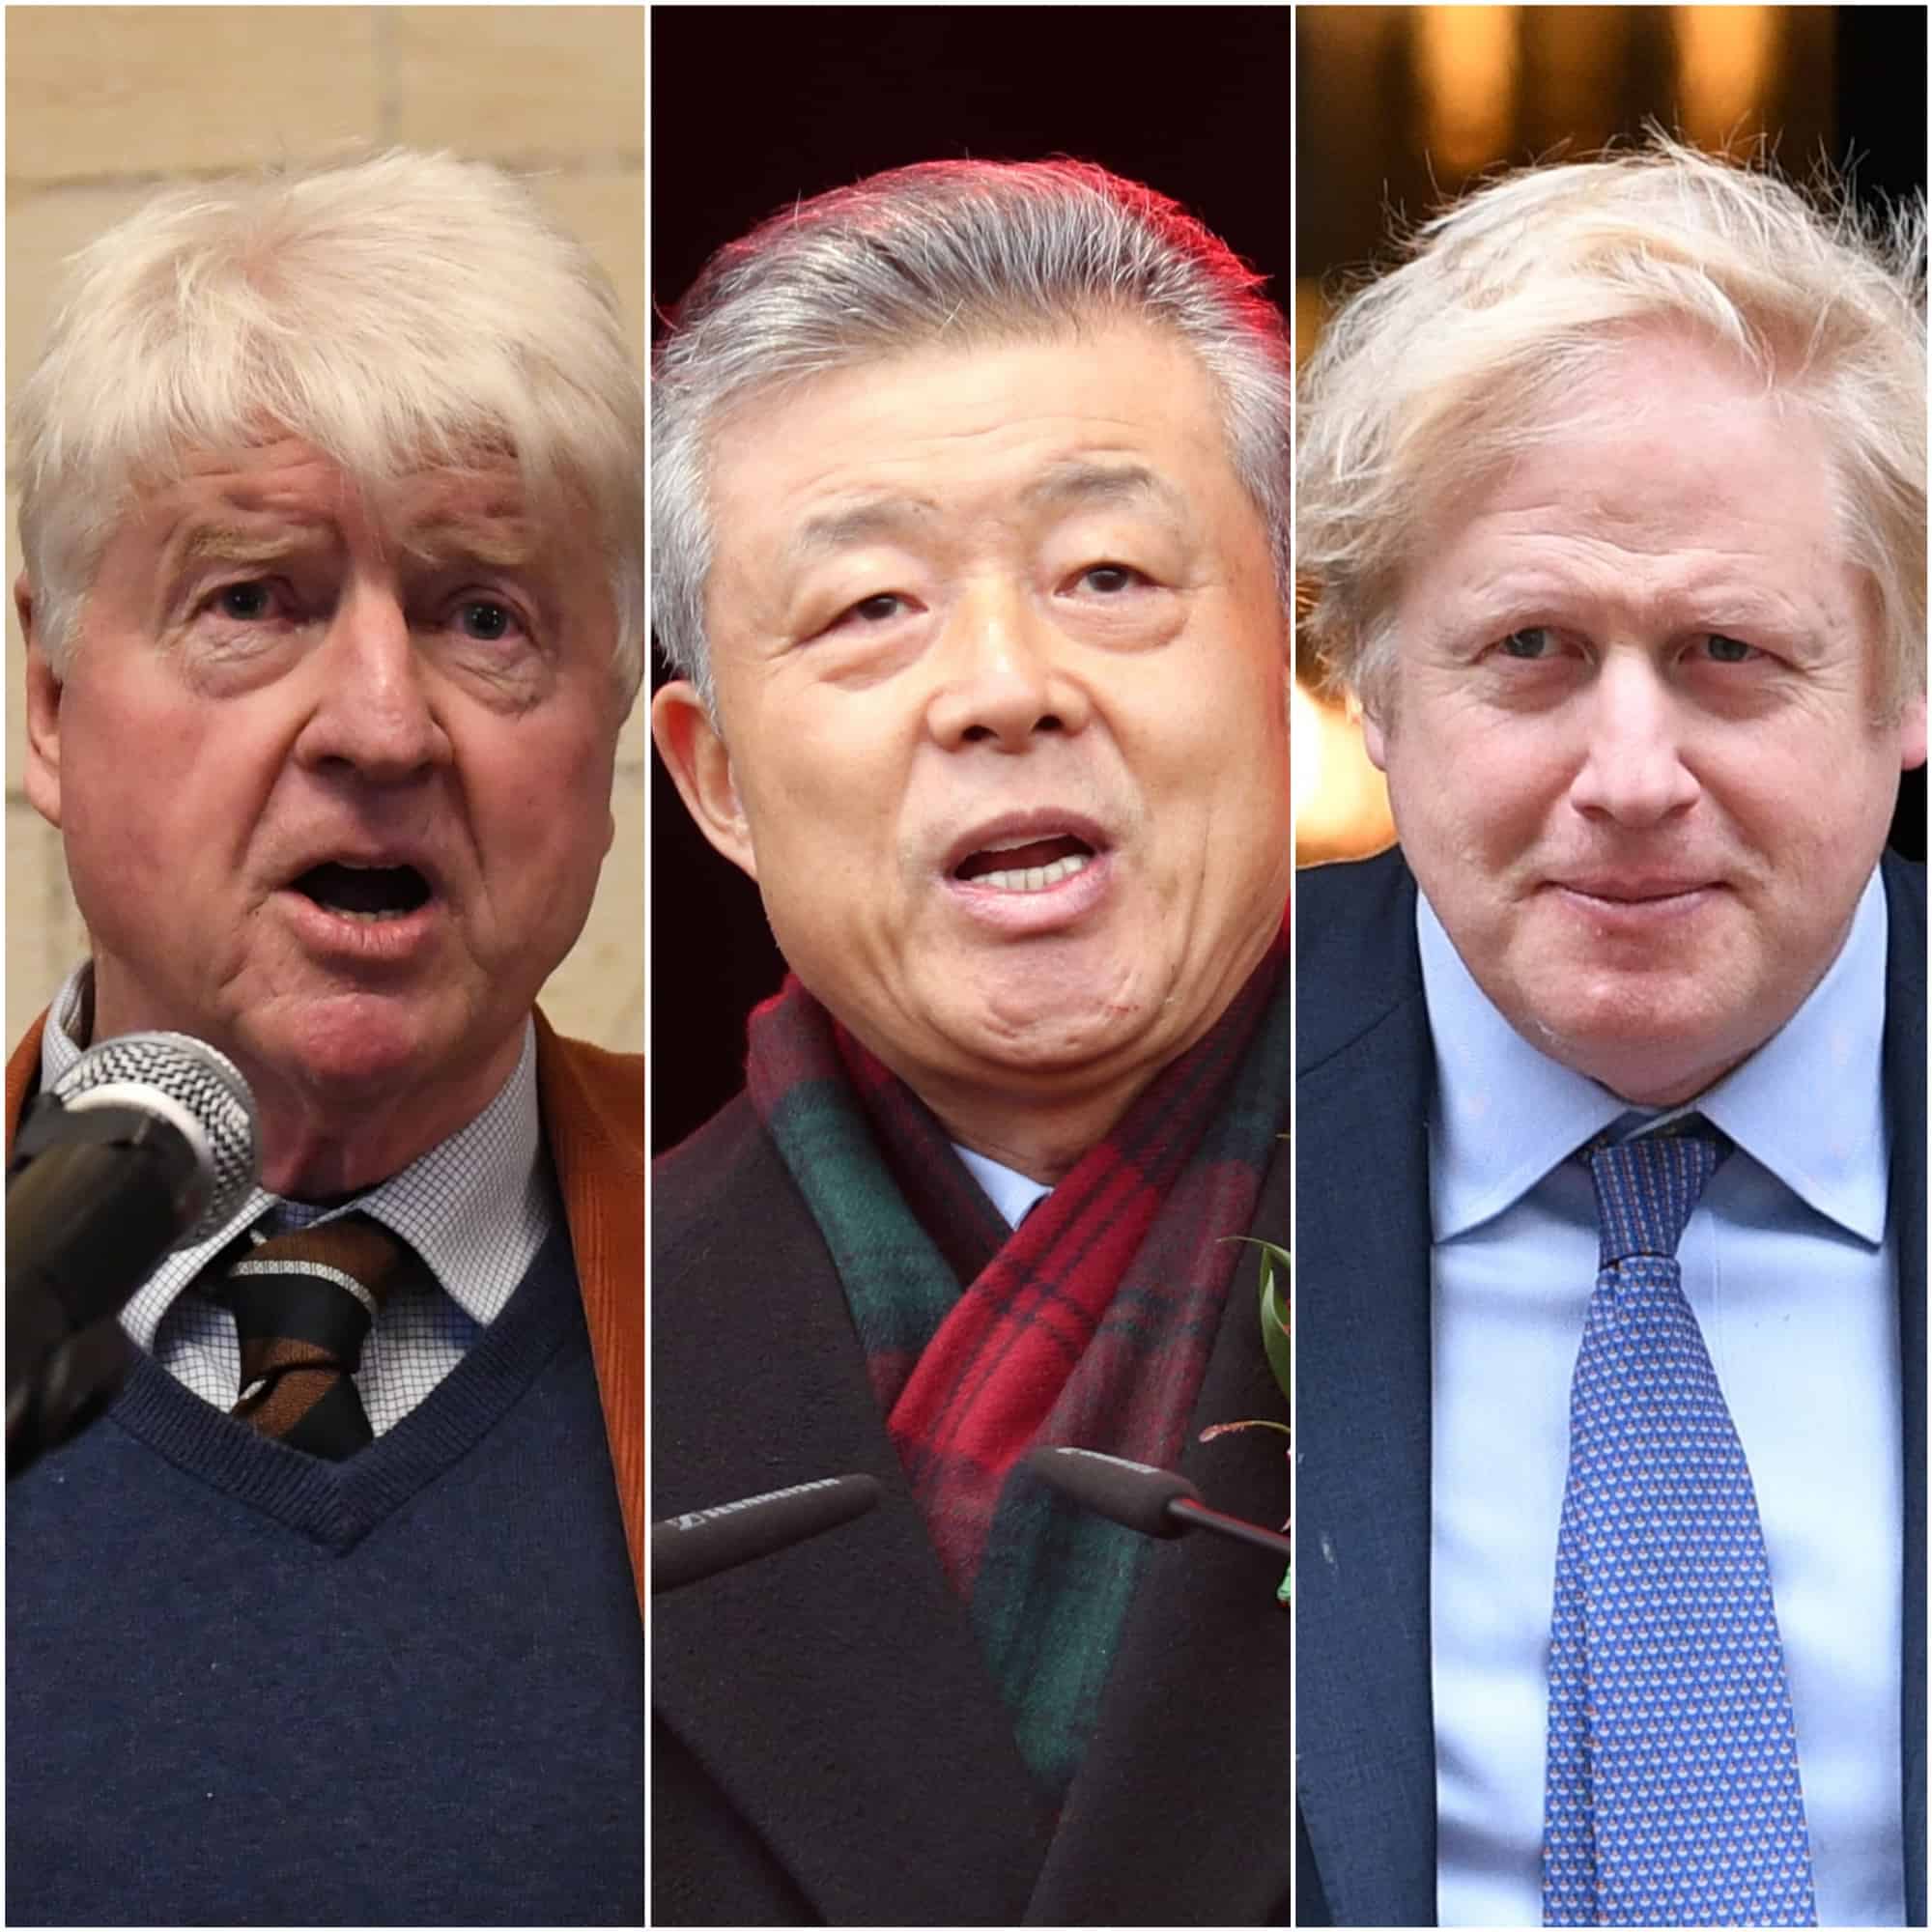 Stanley Johnson reports Chinese concerns on lack of contact from PM over coronavirus